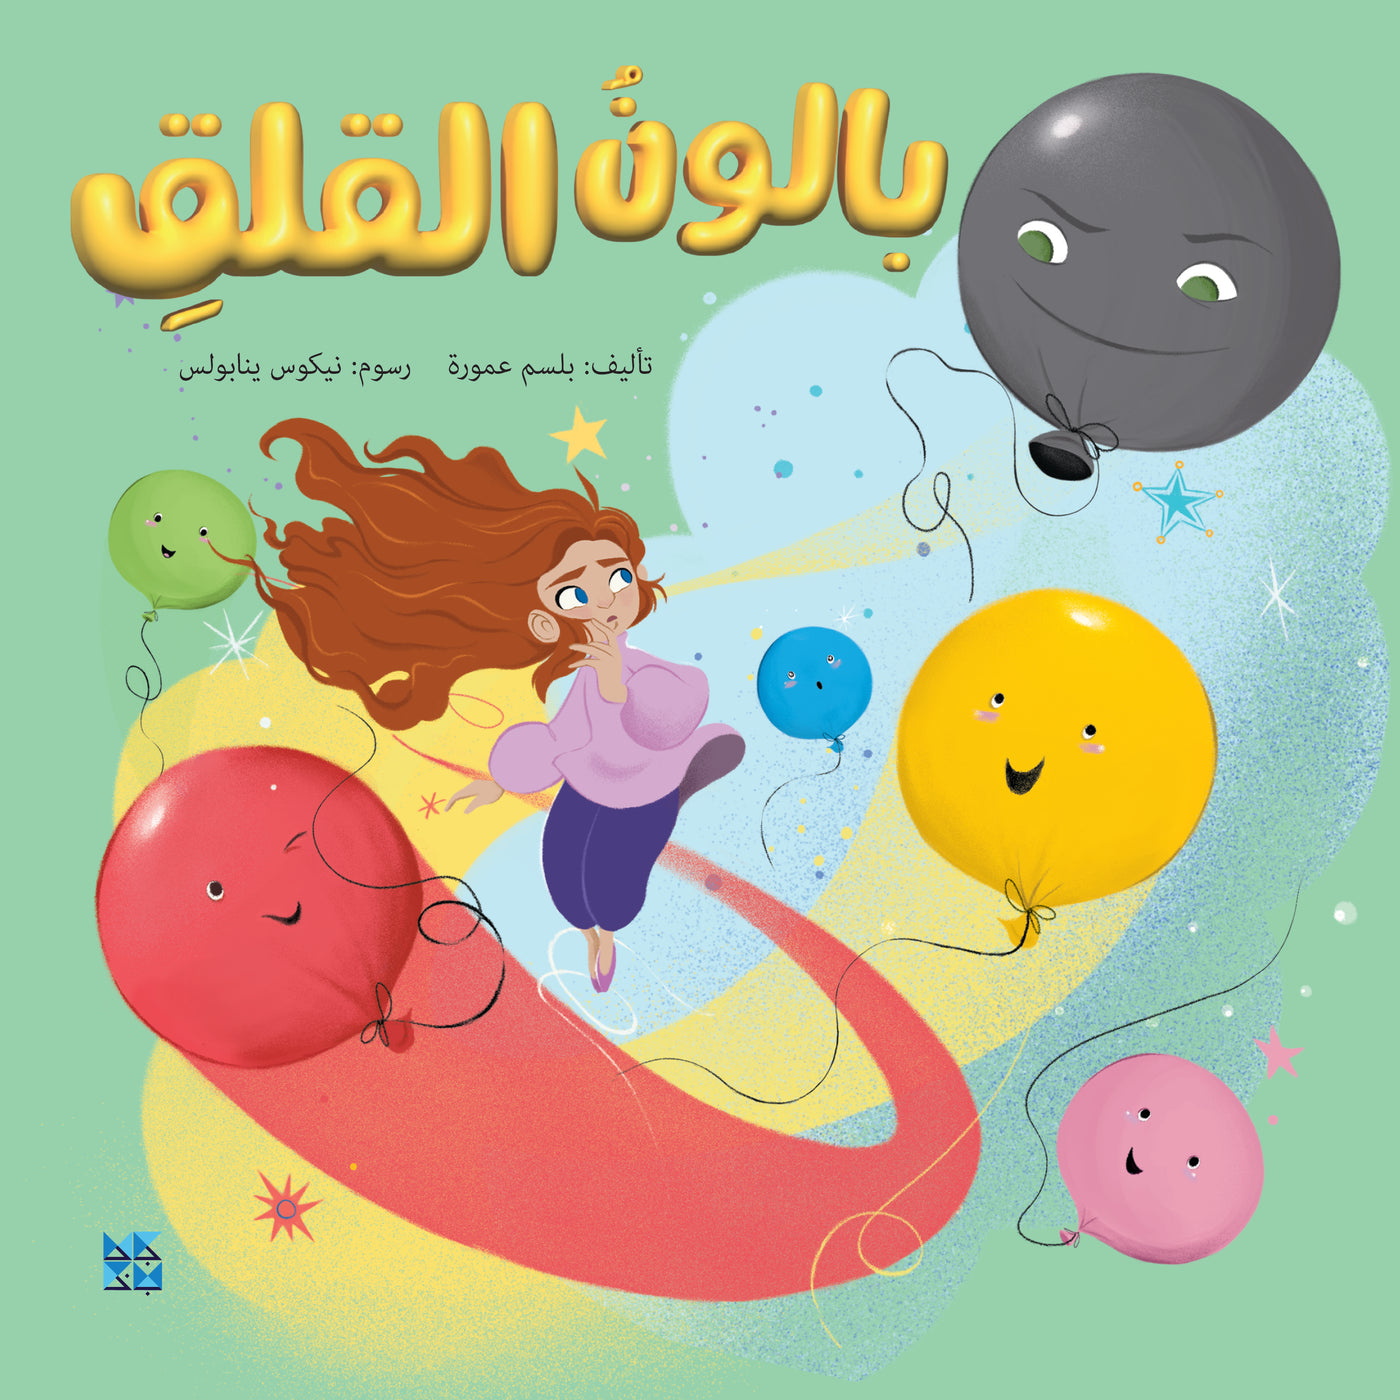 The Worry Balloon Book Cover